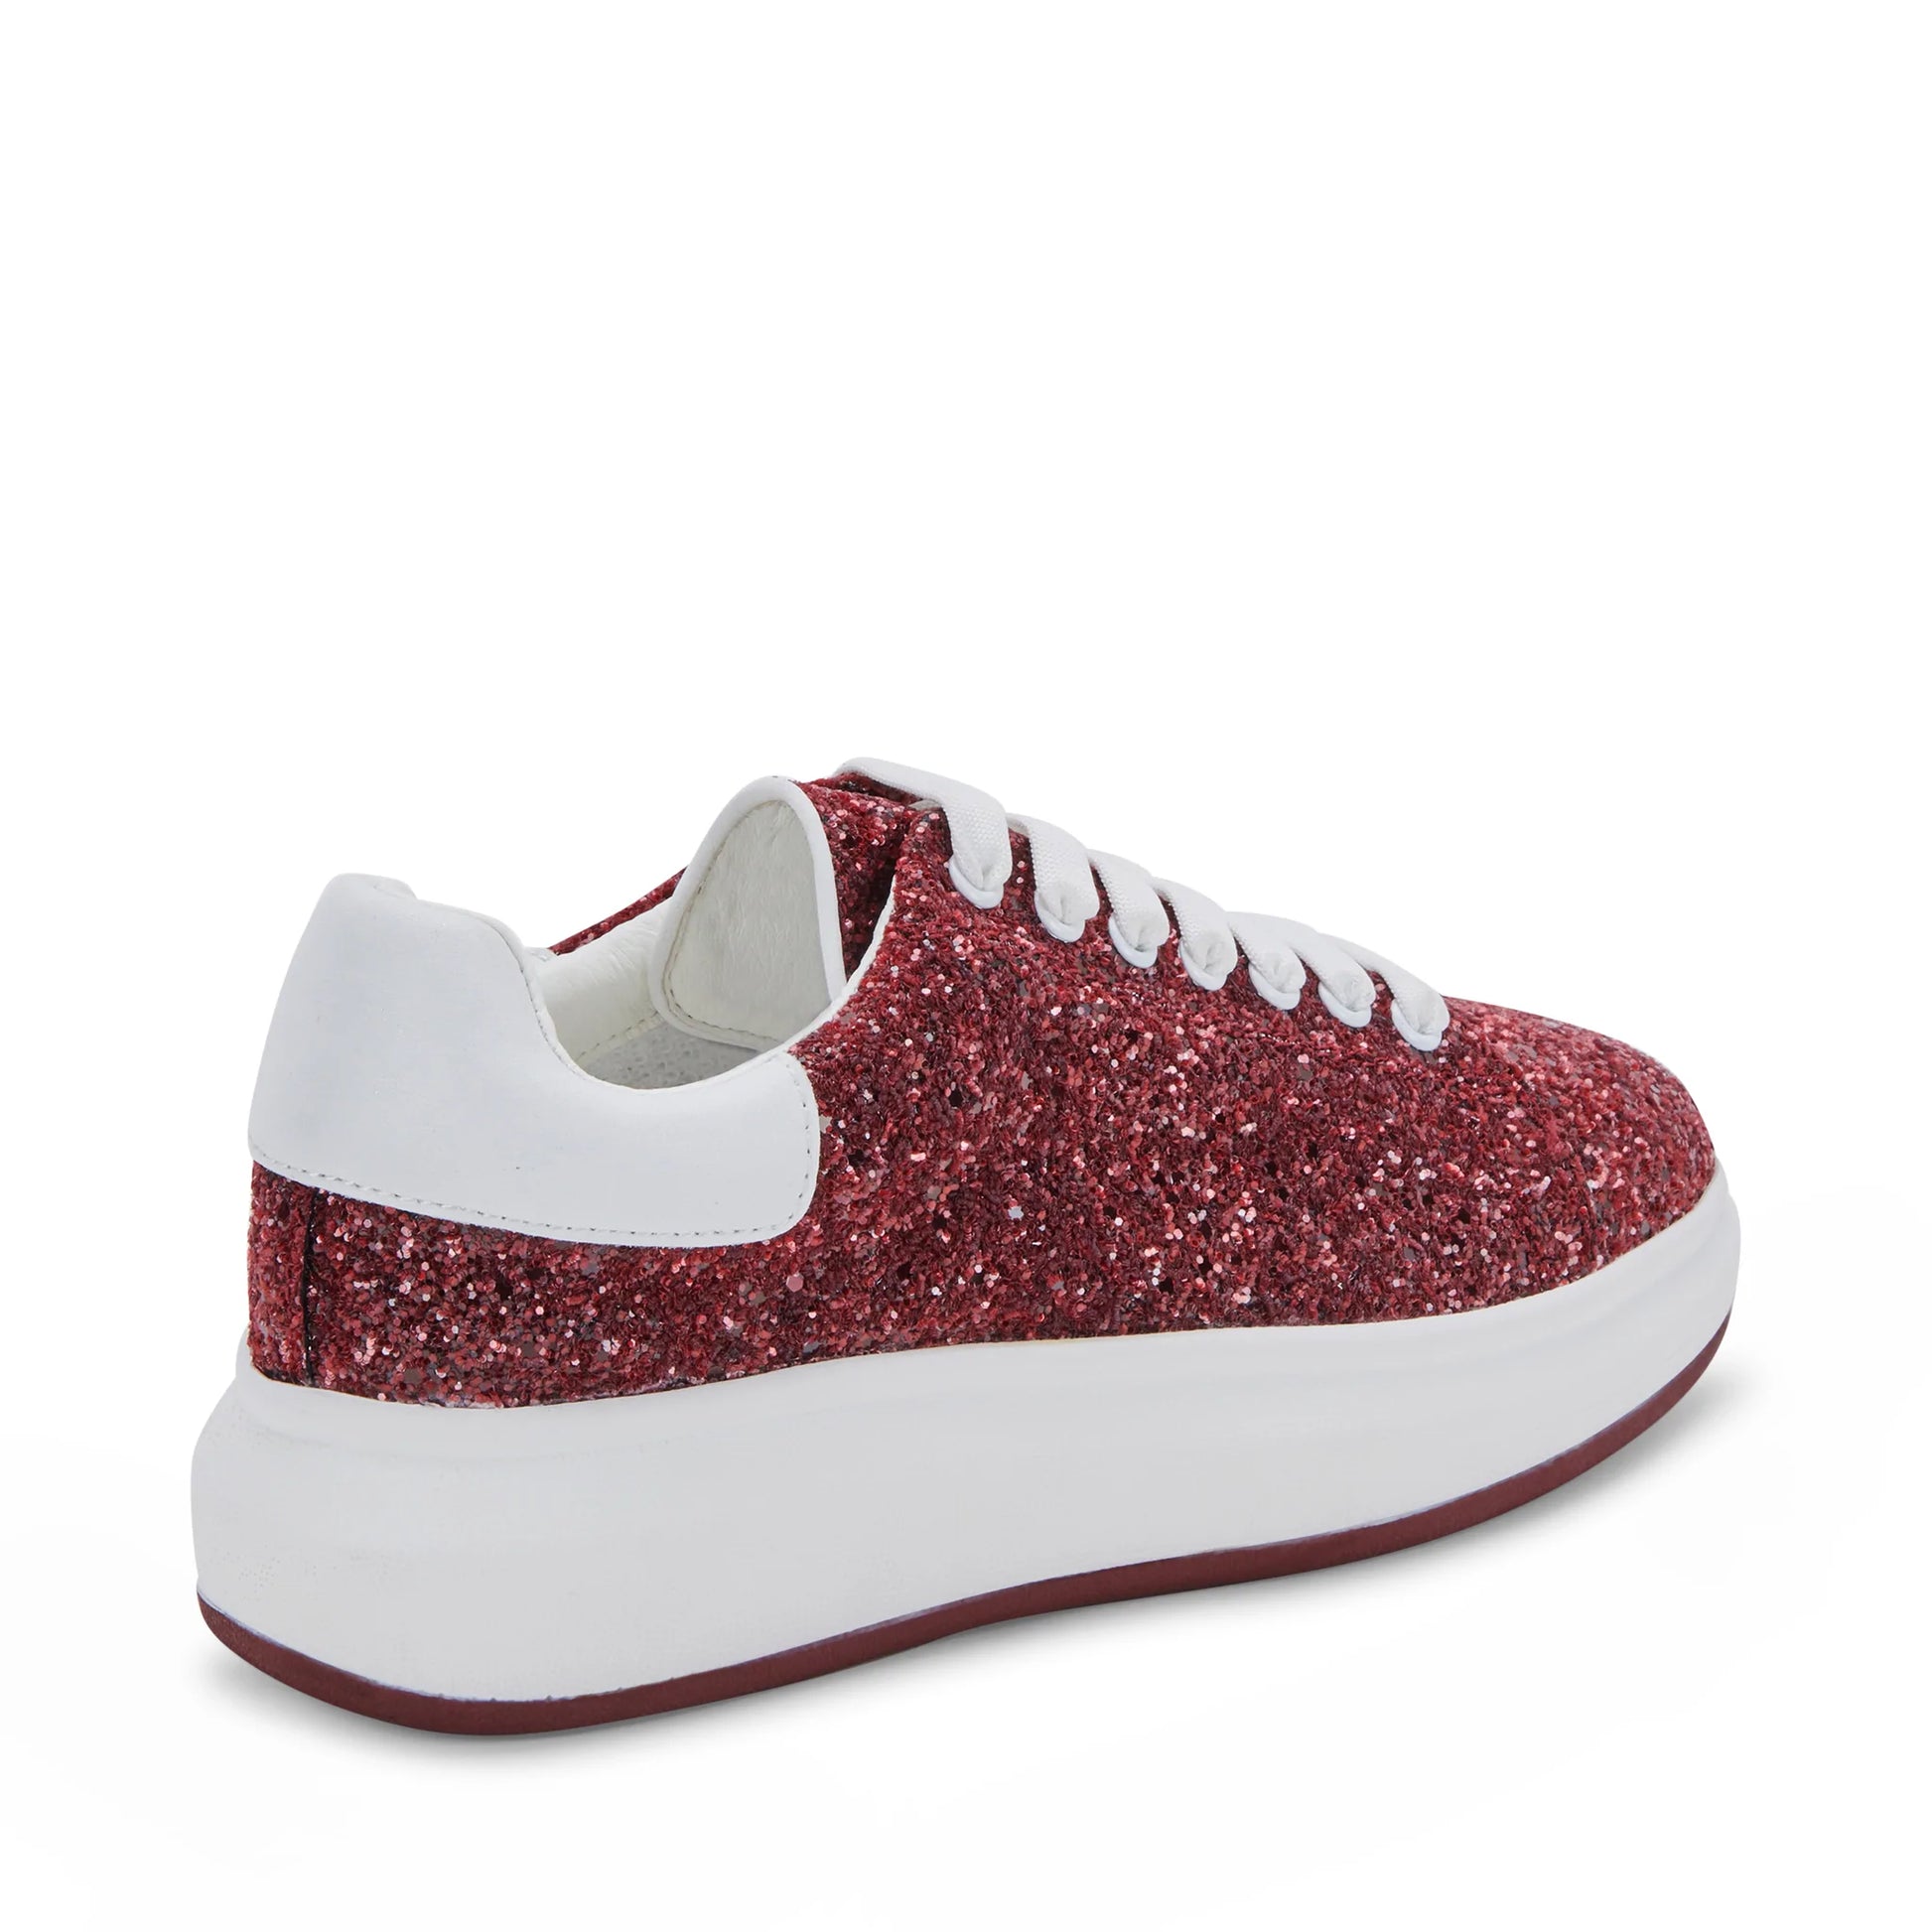 3/4 behind view of blondo diva shoe with white laces and sole and burgundy sequin body